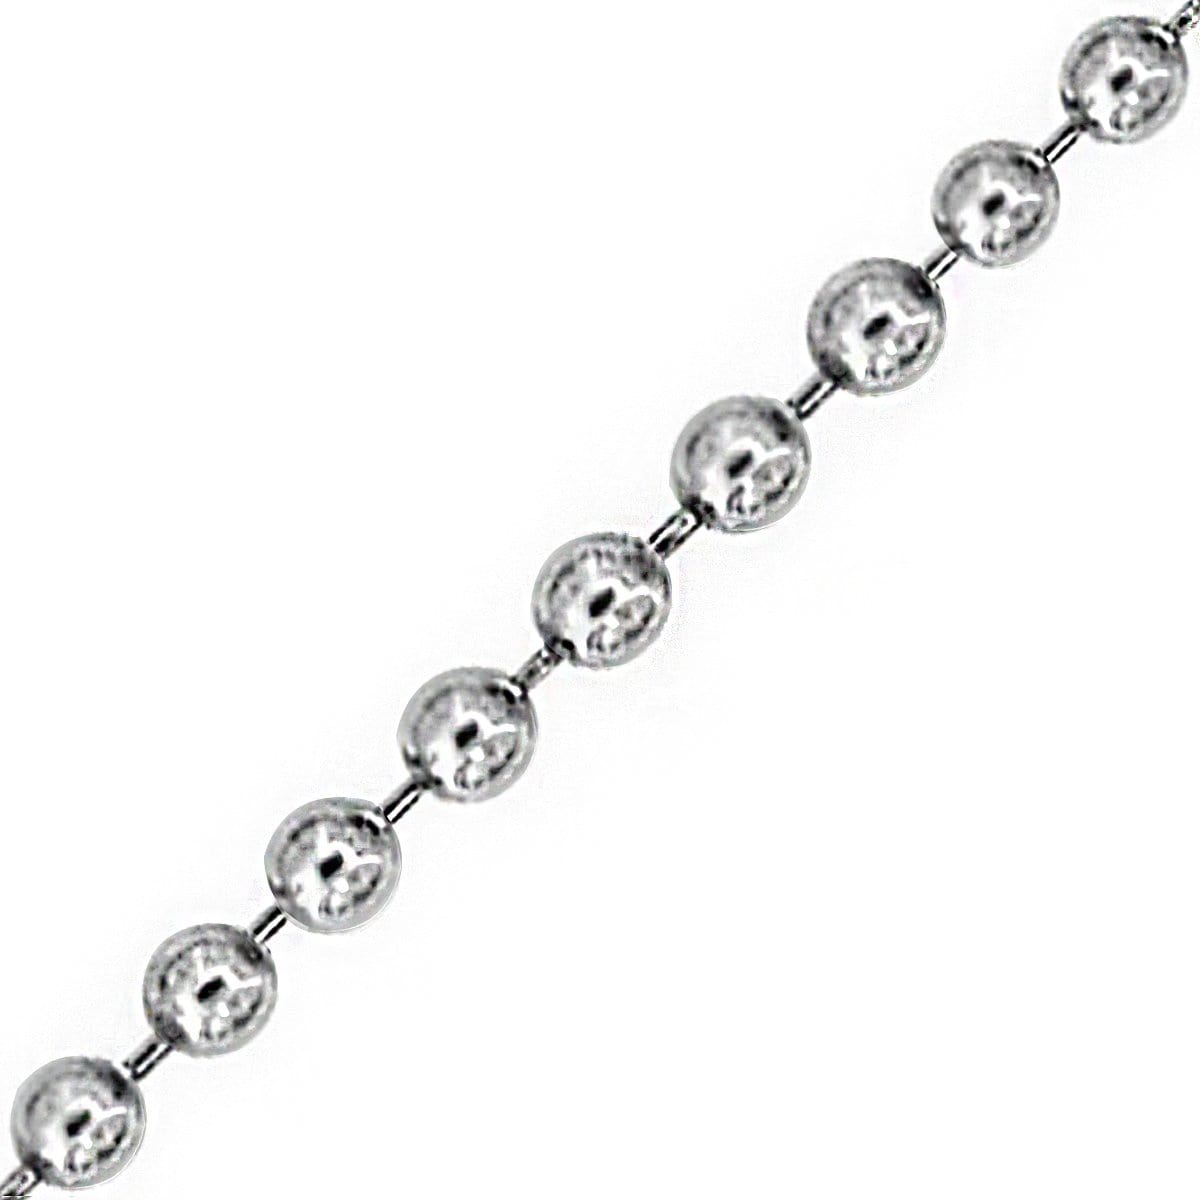 INOX JEWELRY Chains Silver Tone Stainless Steel 3mm Ball Chain